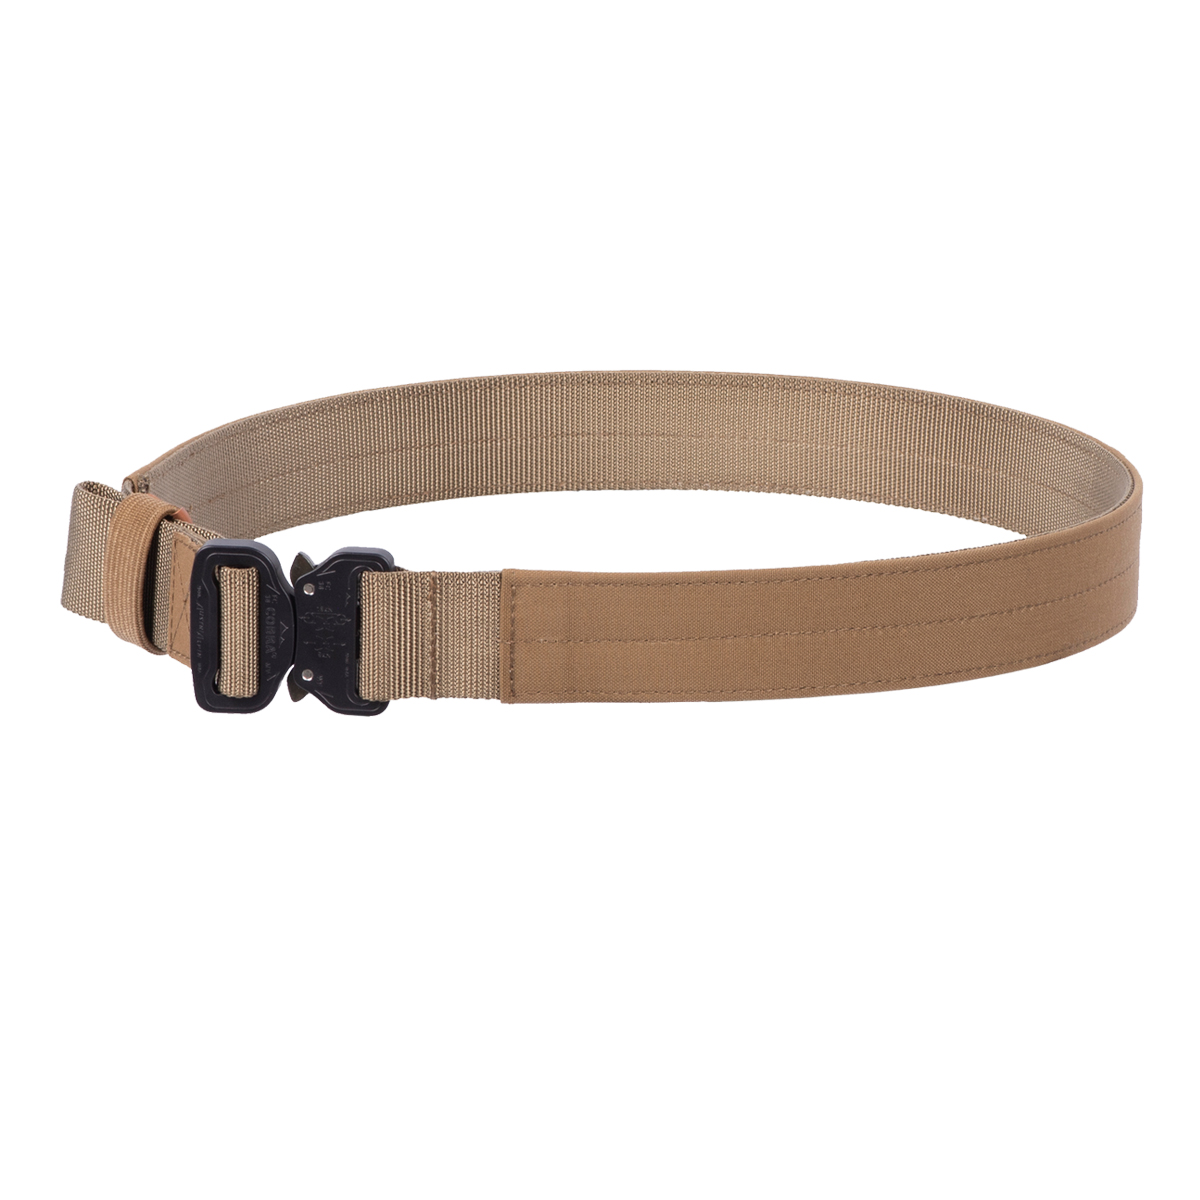 Active Response Tactical Belt by G-Code